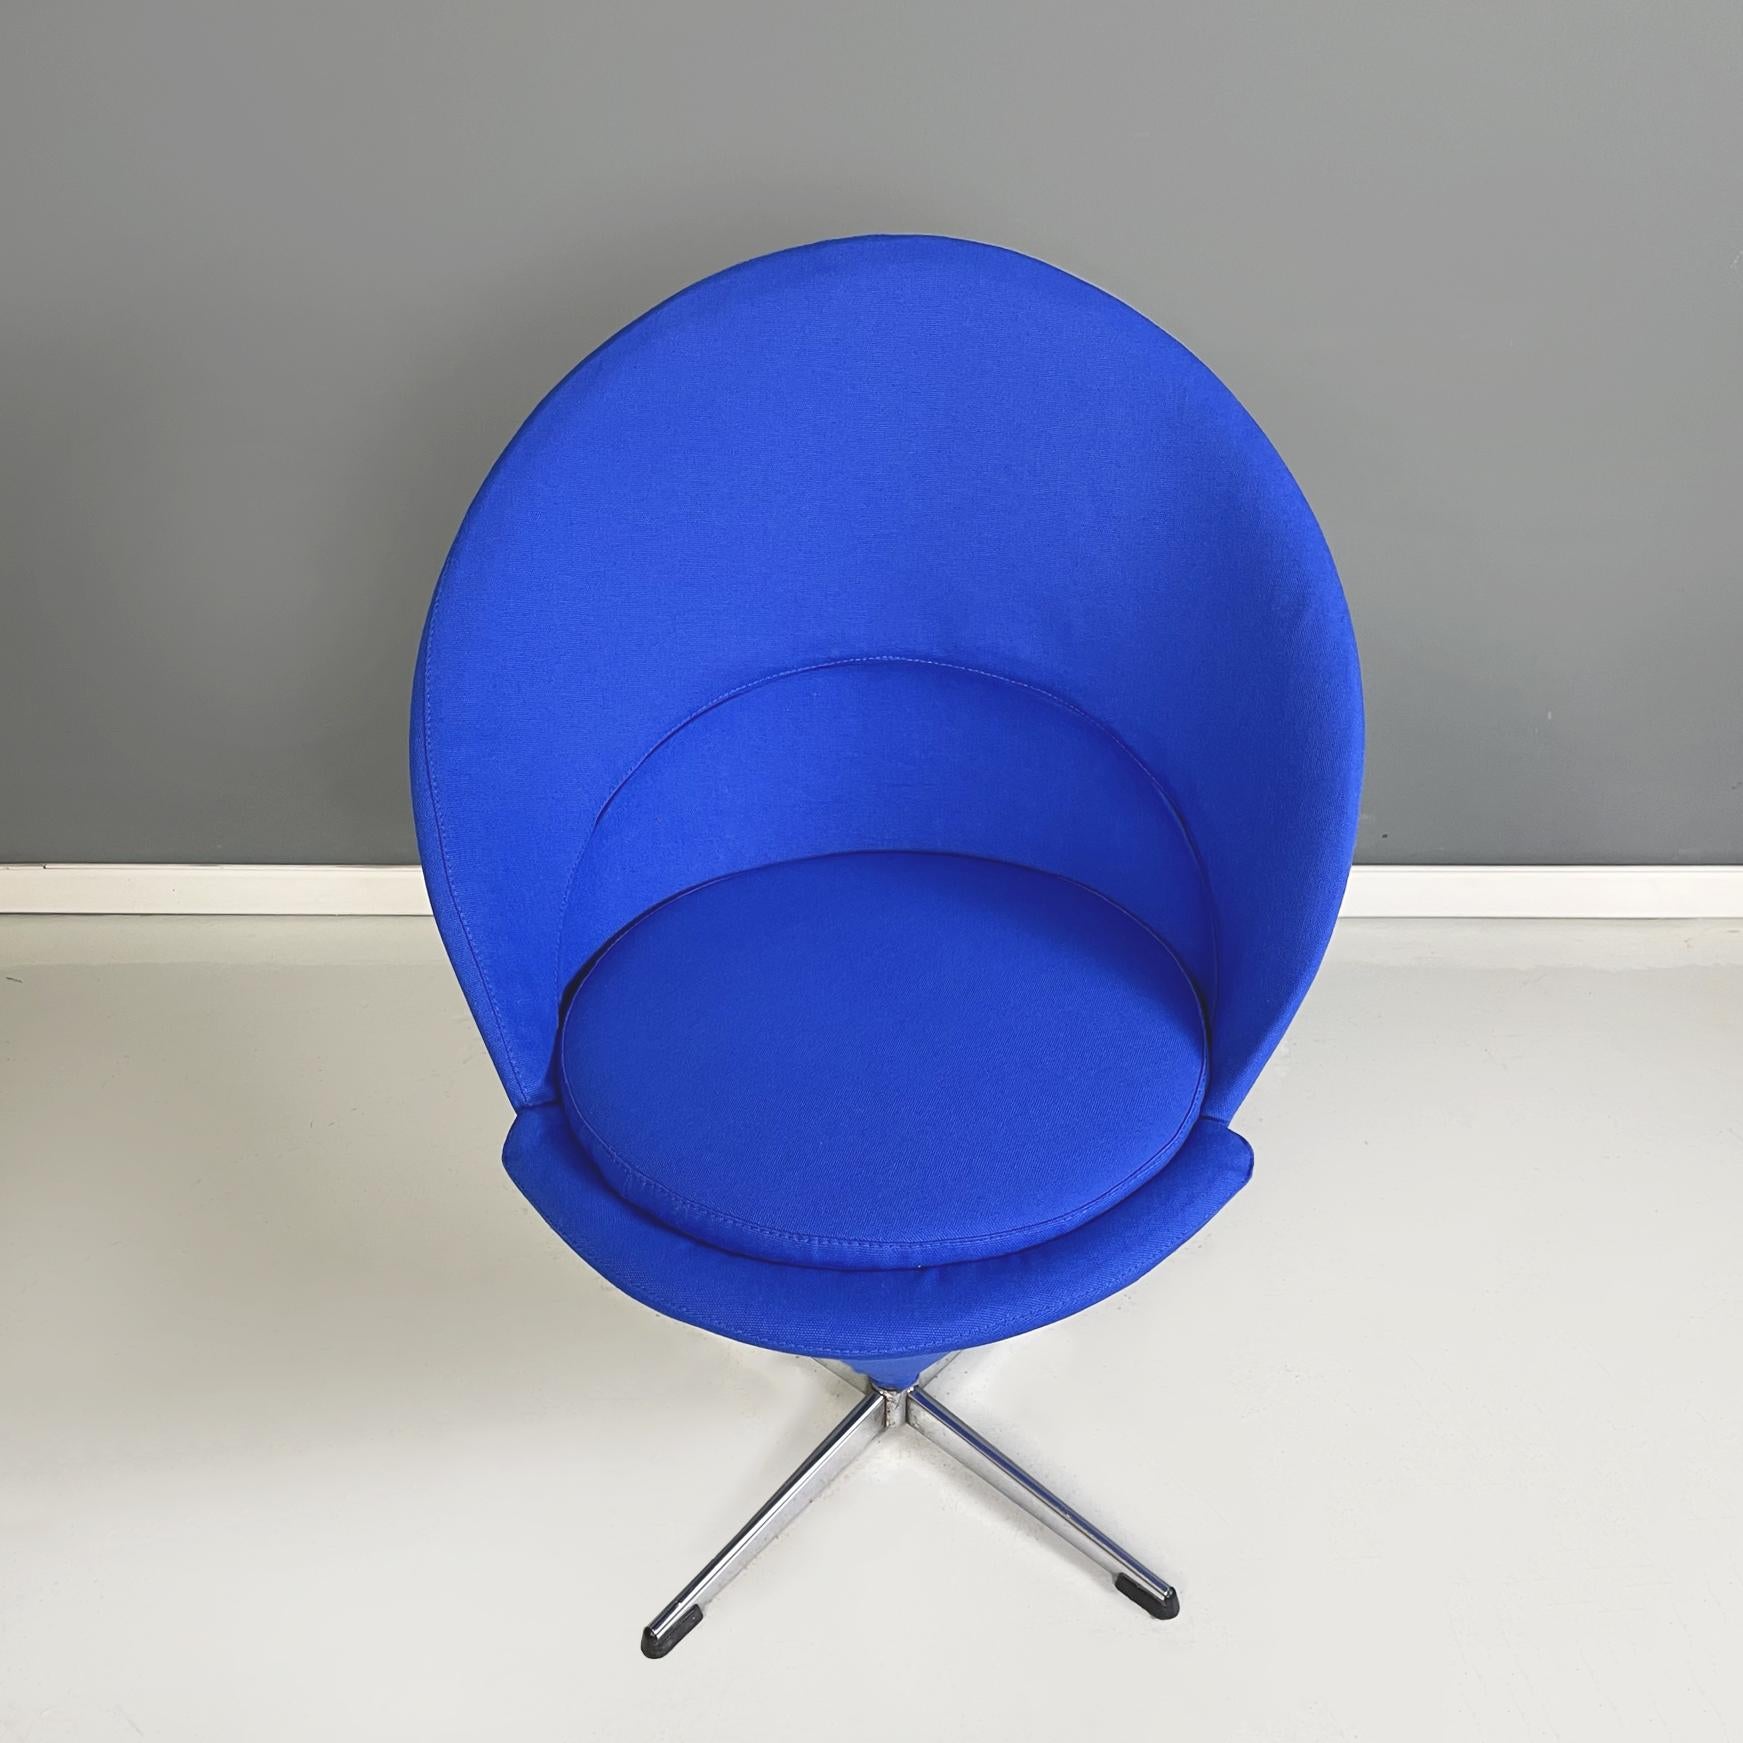 Stainless Steel Italian Midcentury Swivel Armchair Cone Chair by Verner Panton for Vitra, 1958